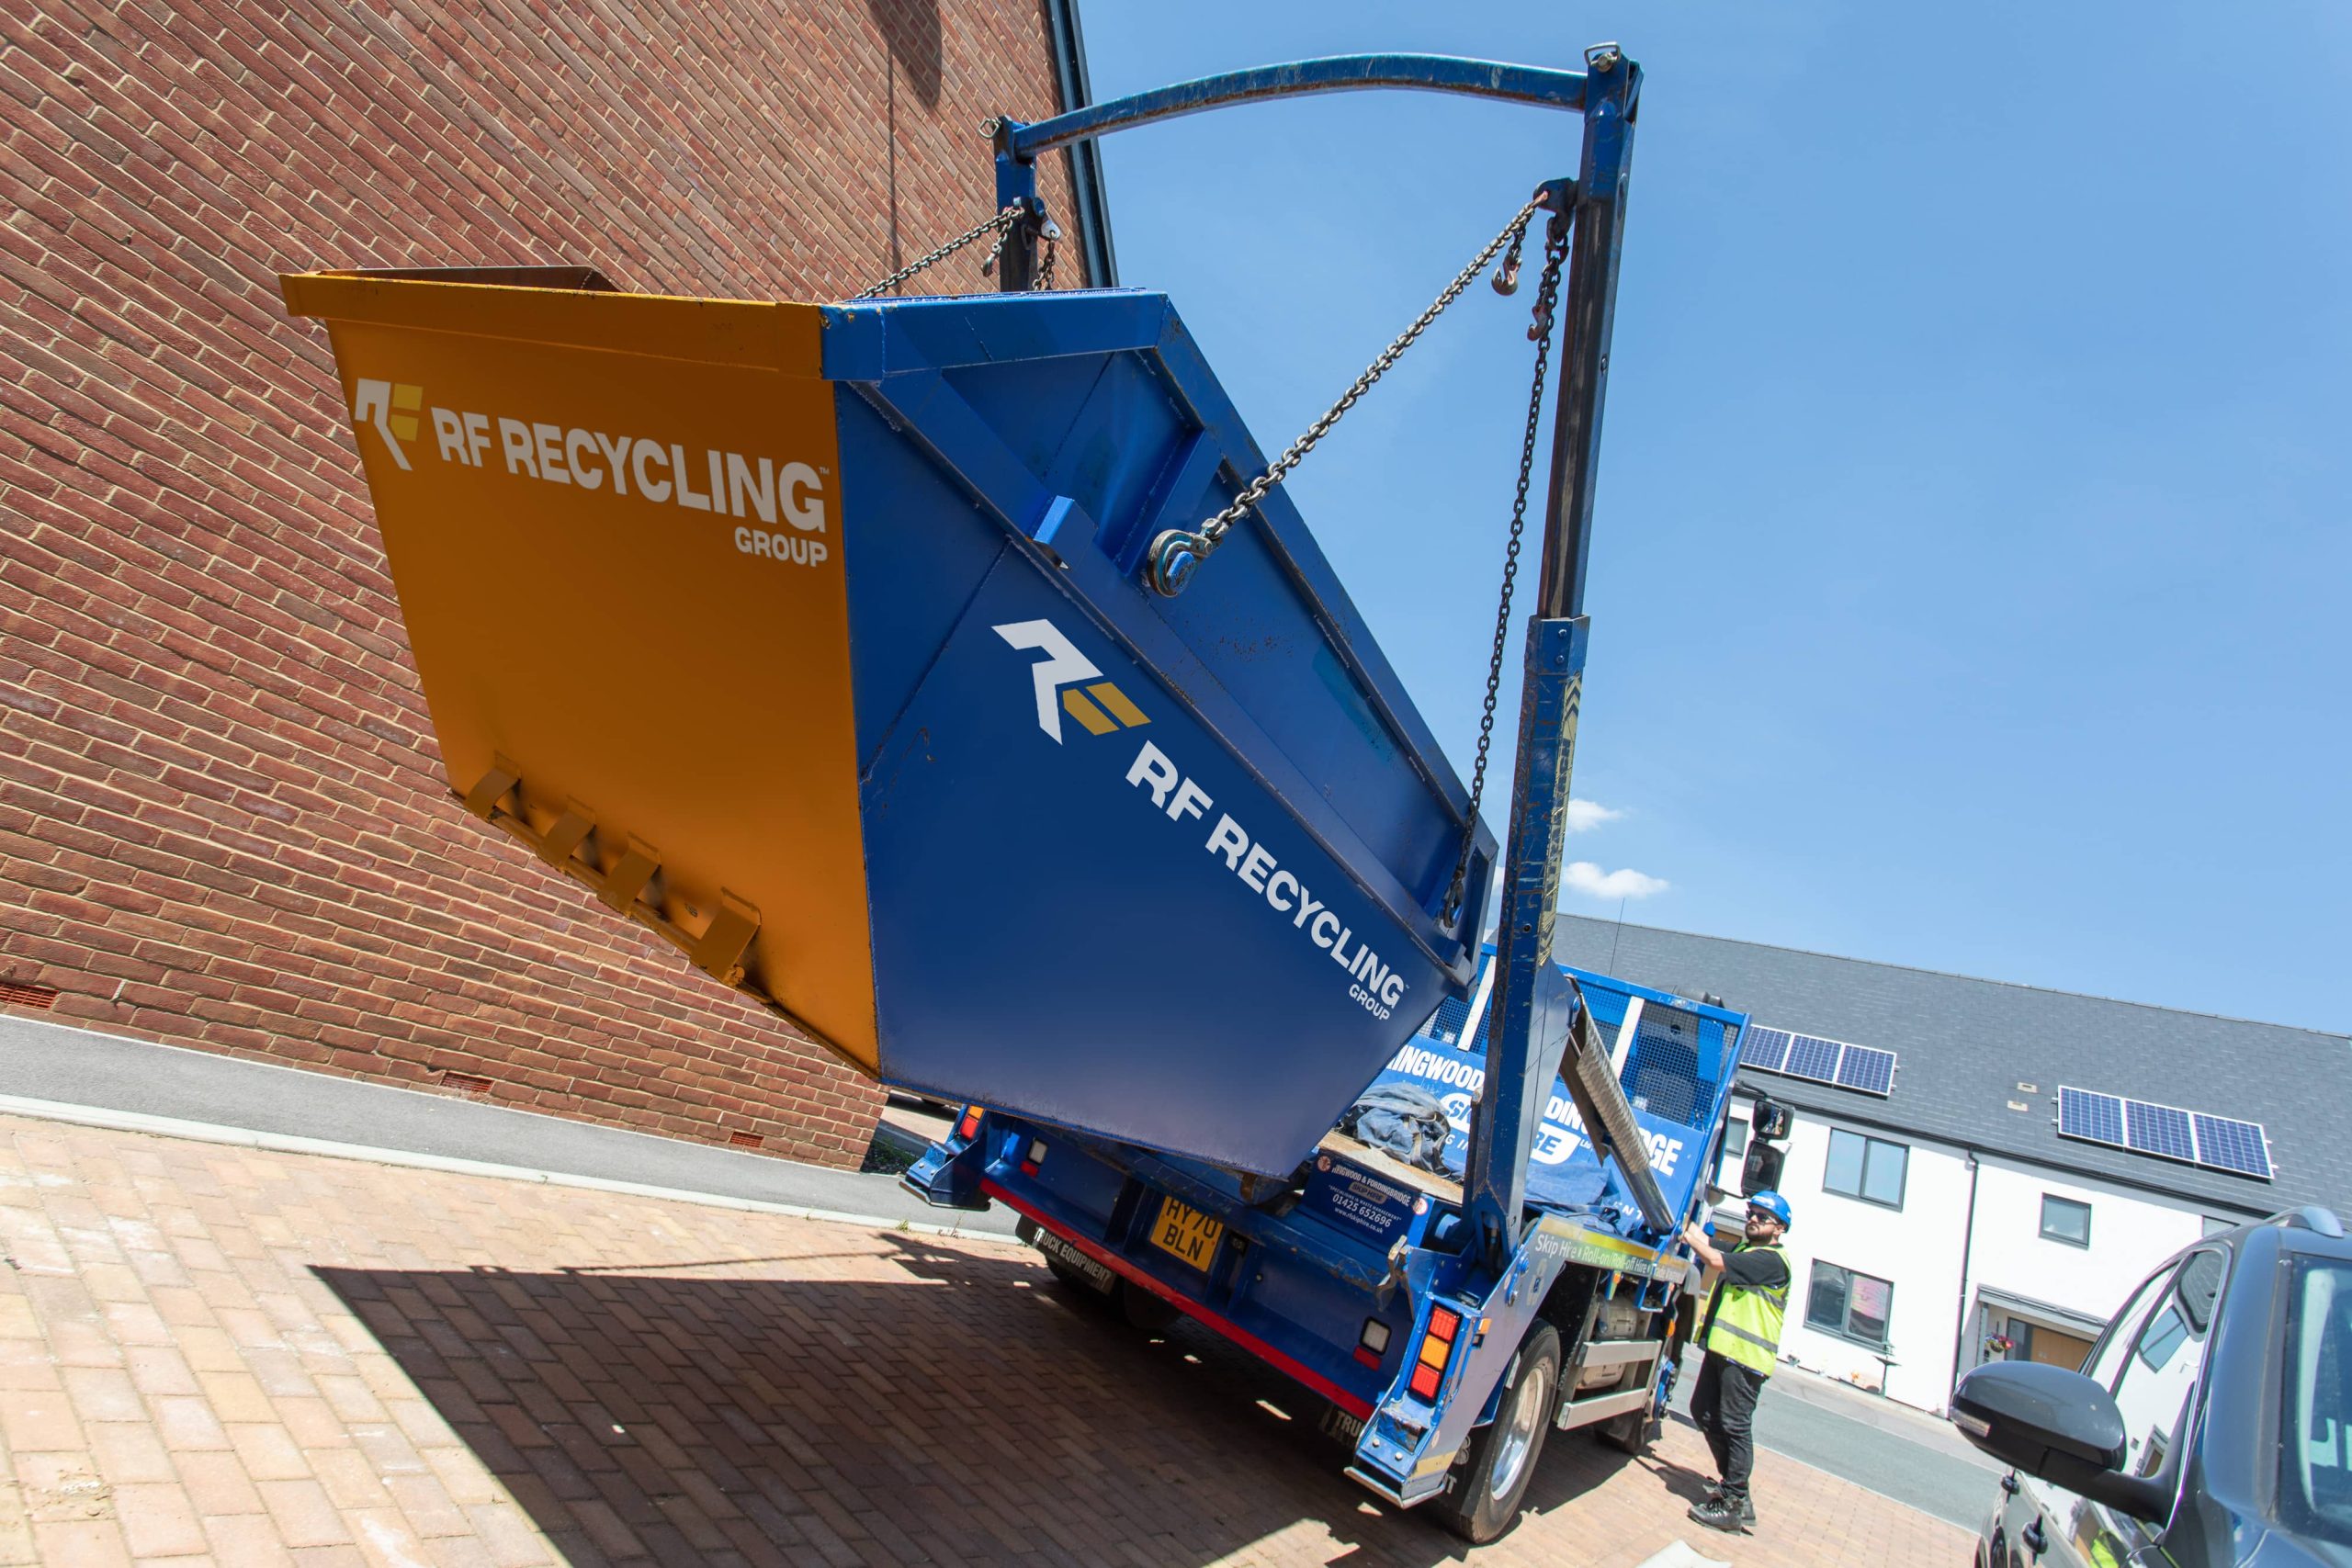 rf recycling skip being raised on to a truck